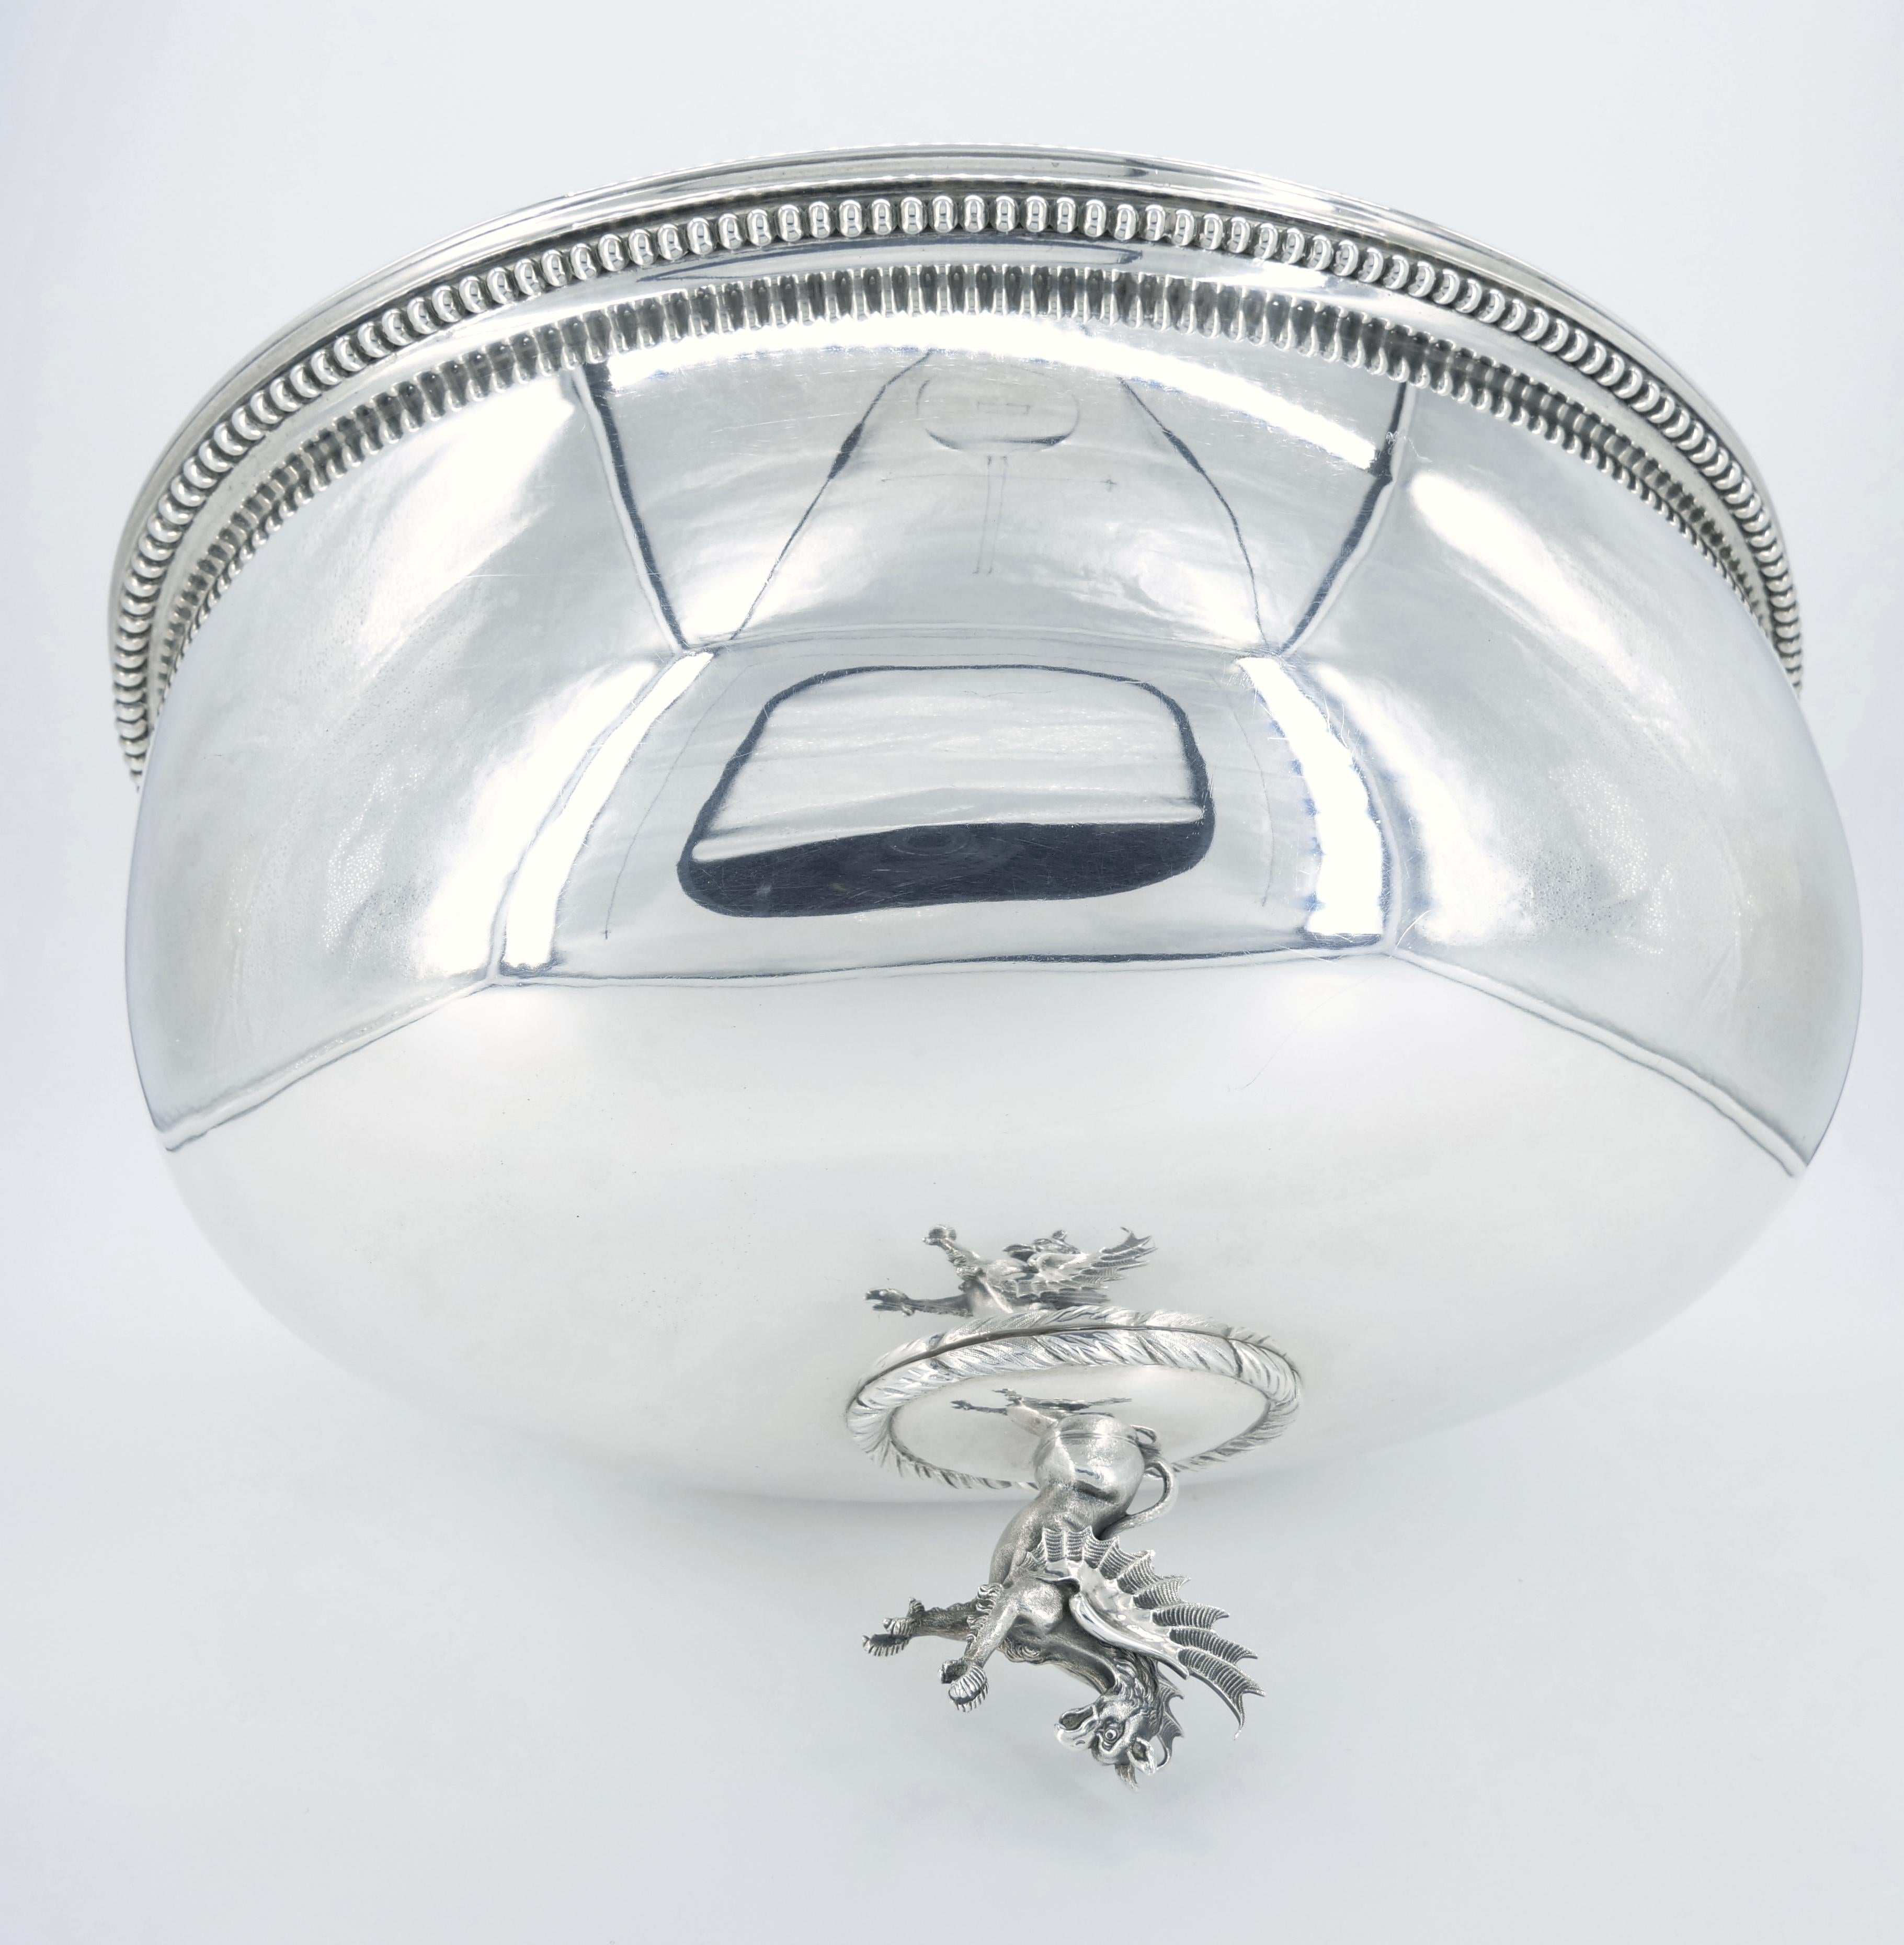 19th Century English Silverplate Meat Dome with Dragon Finial Handle For Sale 3